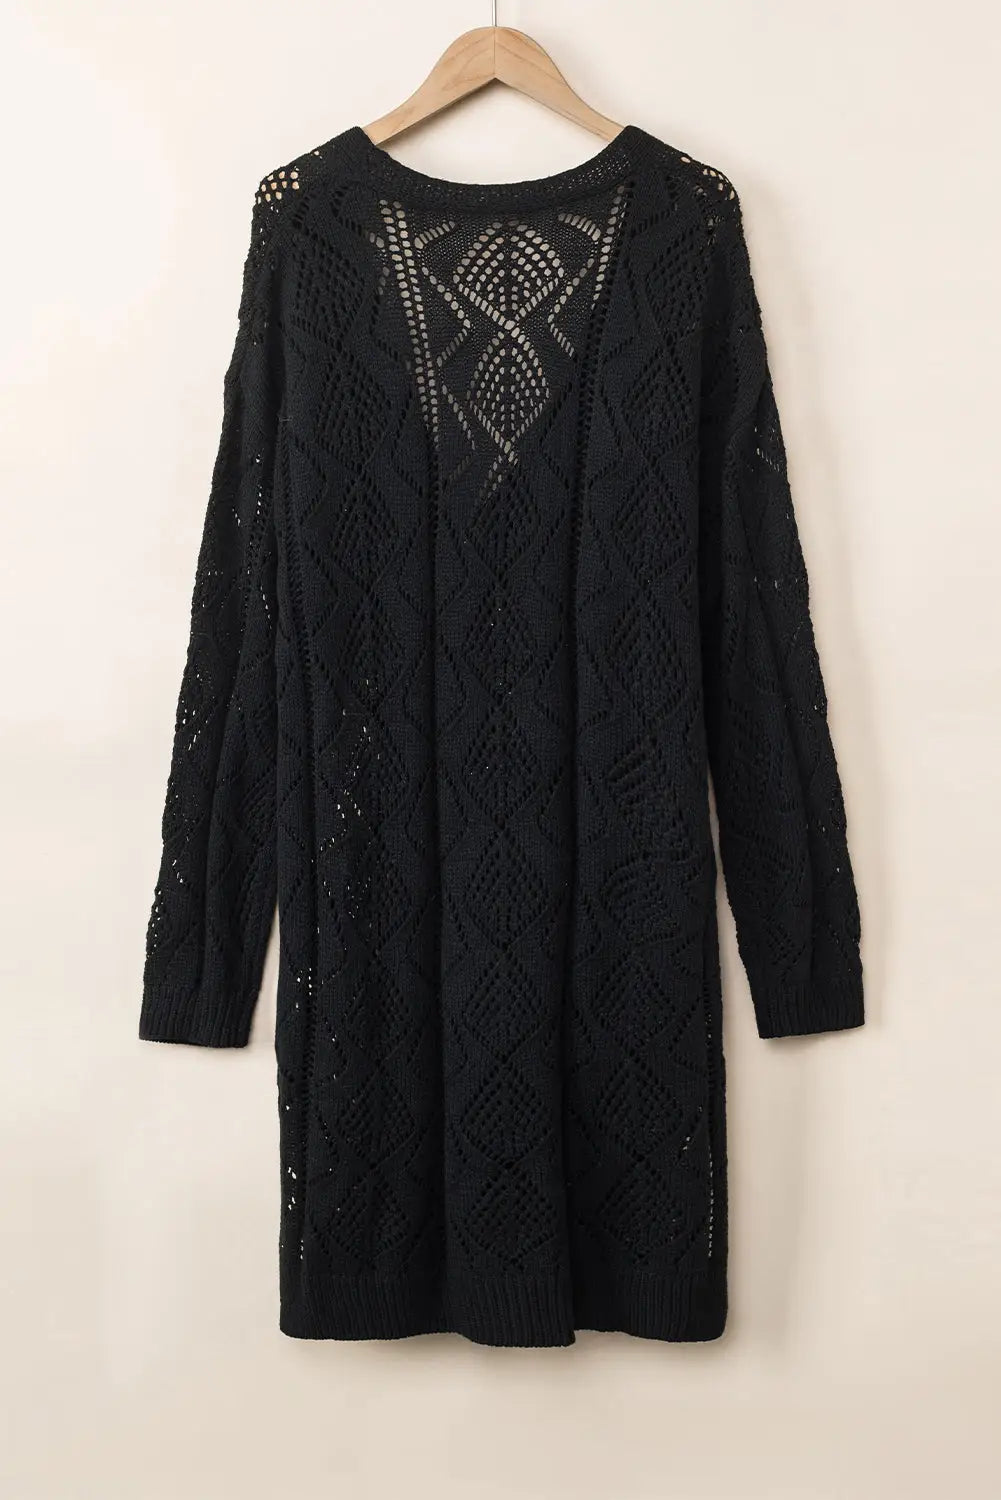 Khaki hollow-out openwork knit cardigan - sweaters & cardigans